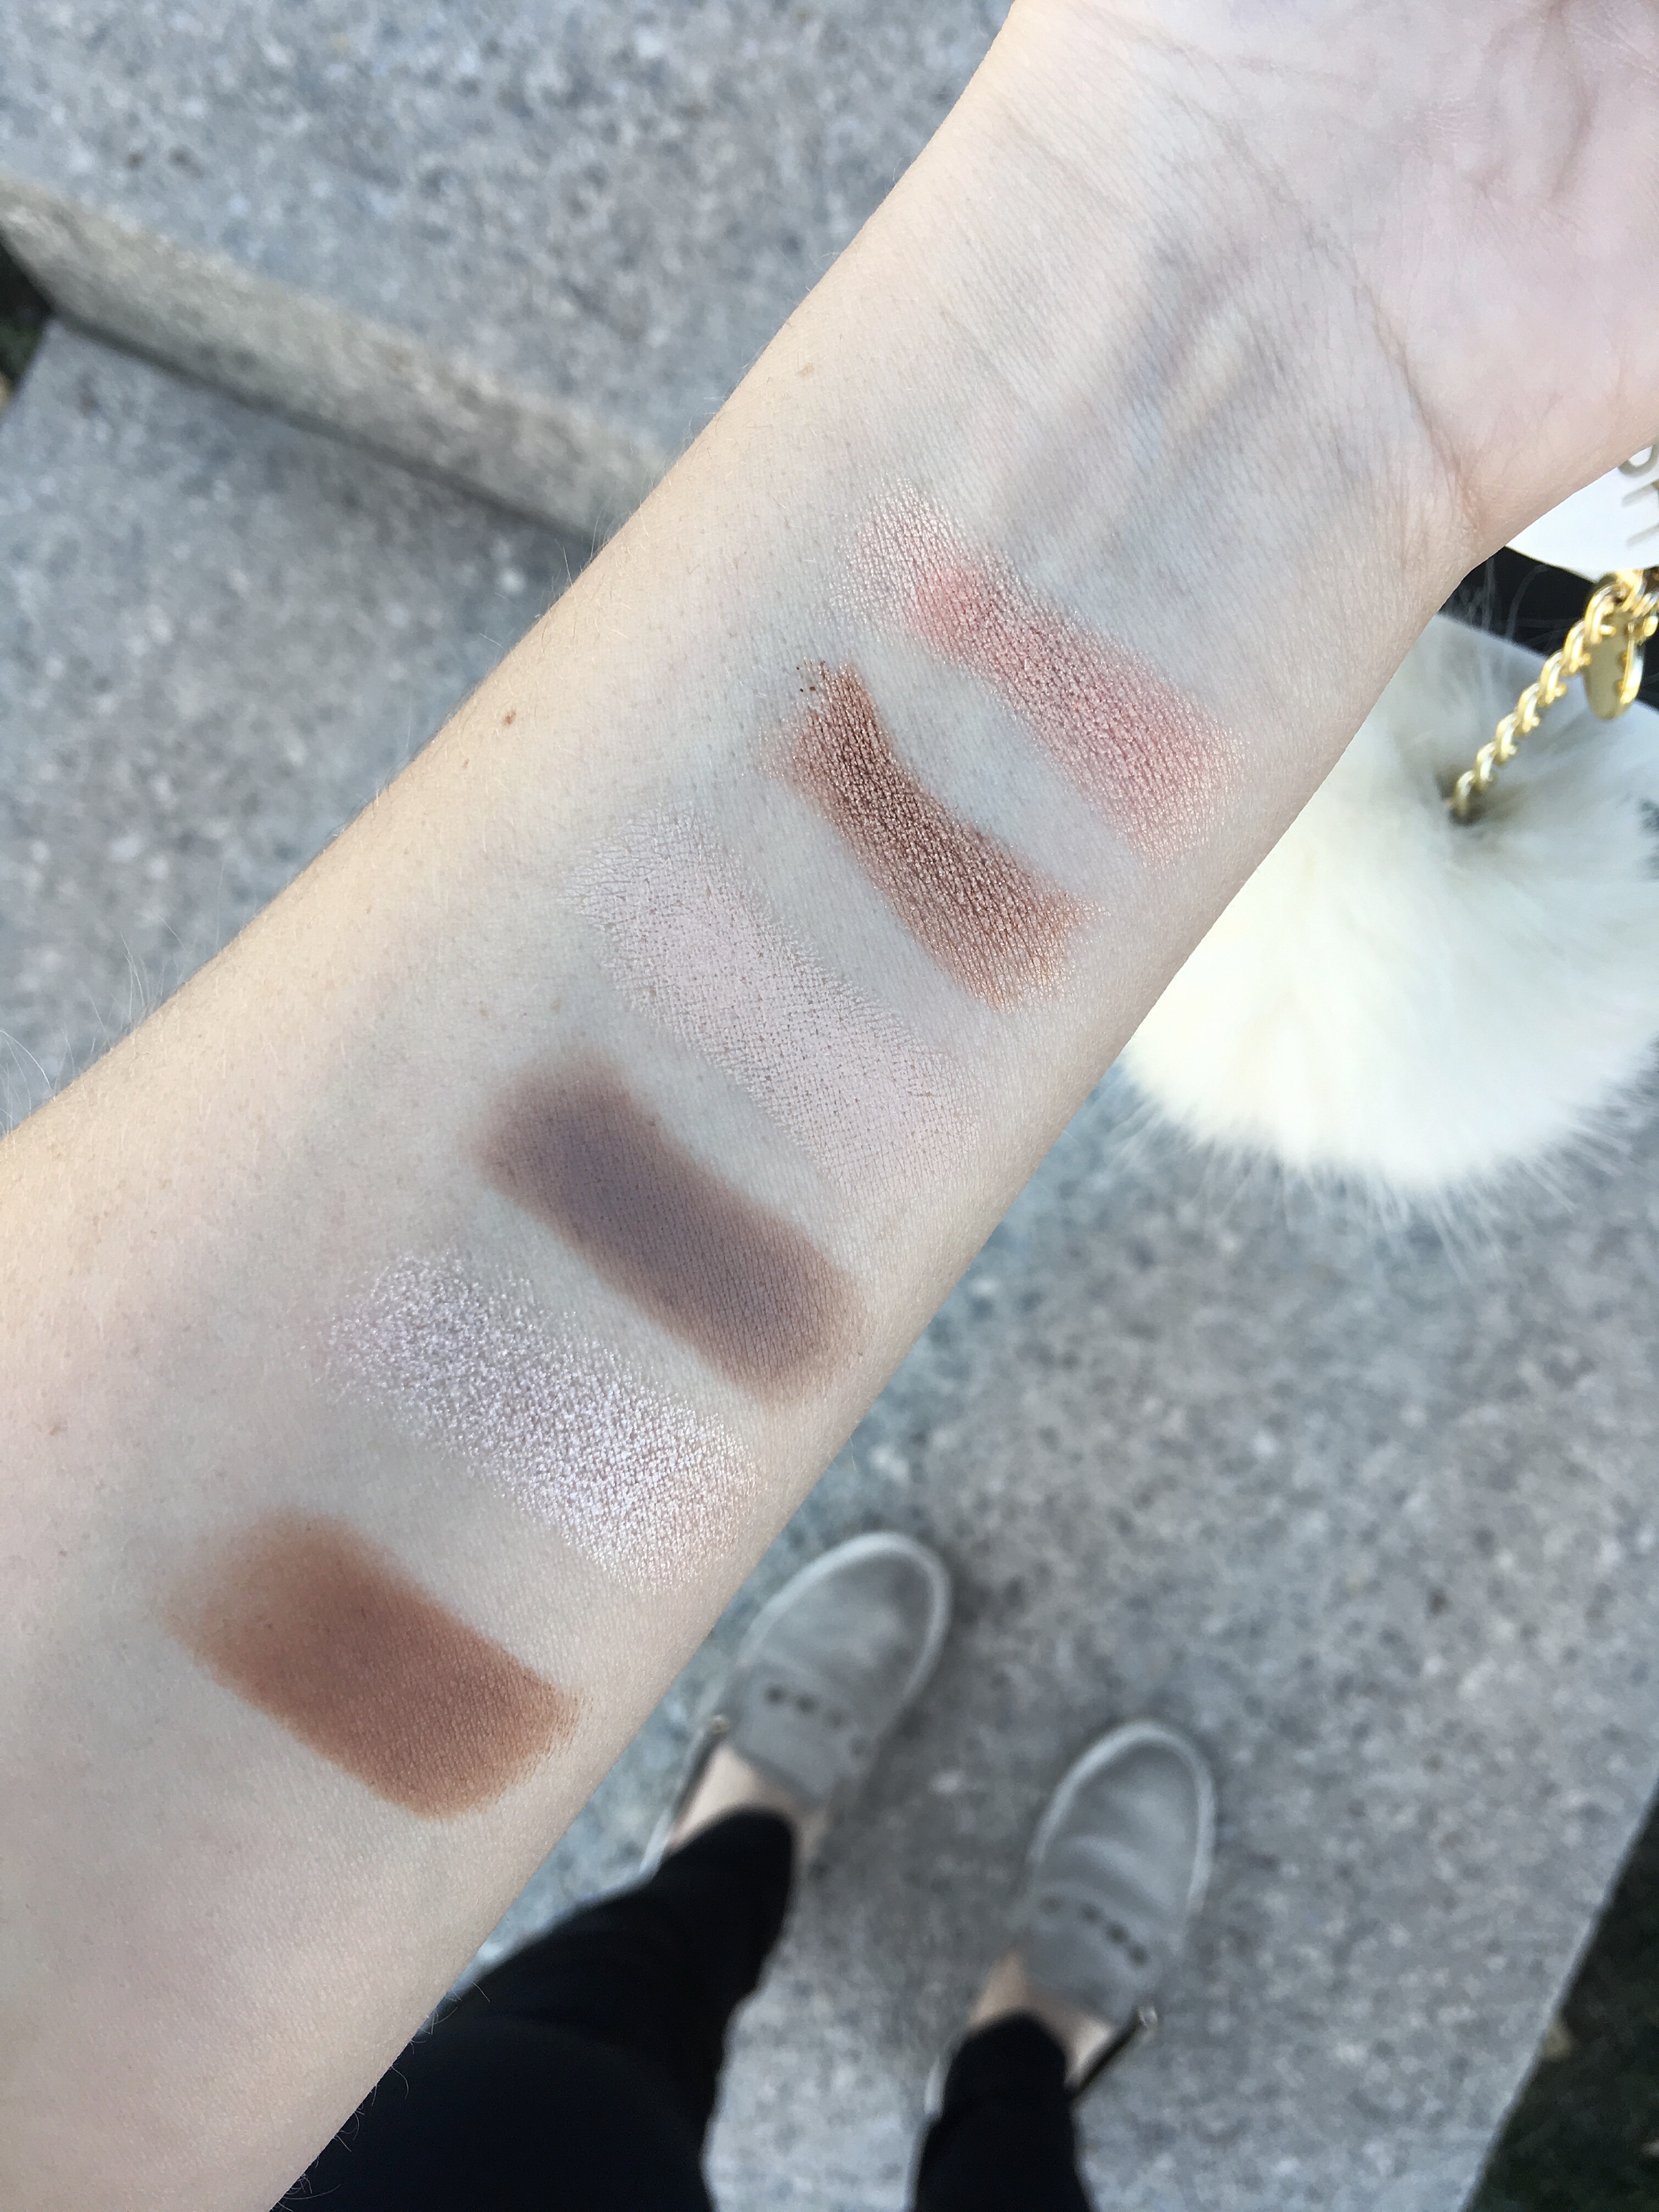 Drea Marie shares her FENTY BEAUTY MATCH STIX TRIO LIGHT REVIEW! GAHHH I have so much to share. Natural contour? YES. CLICK HERE.